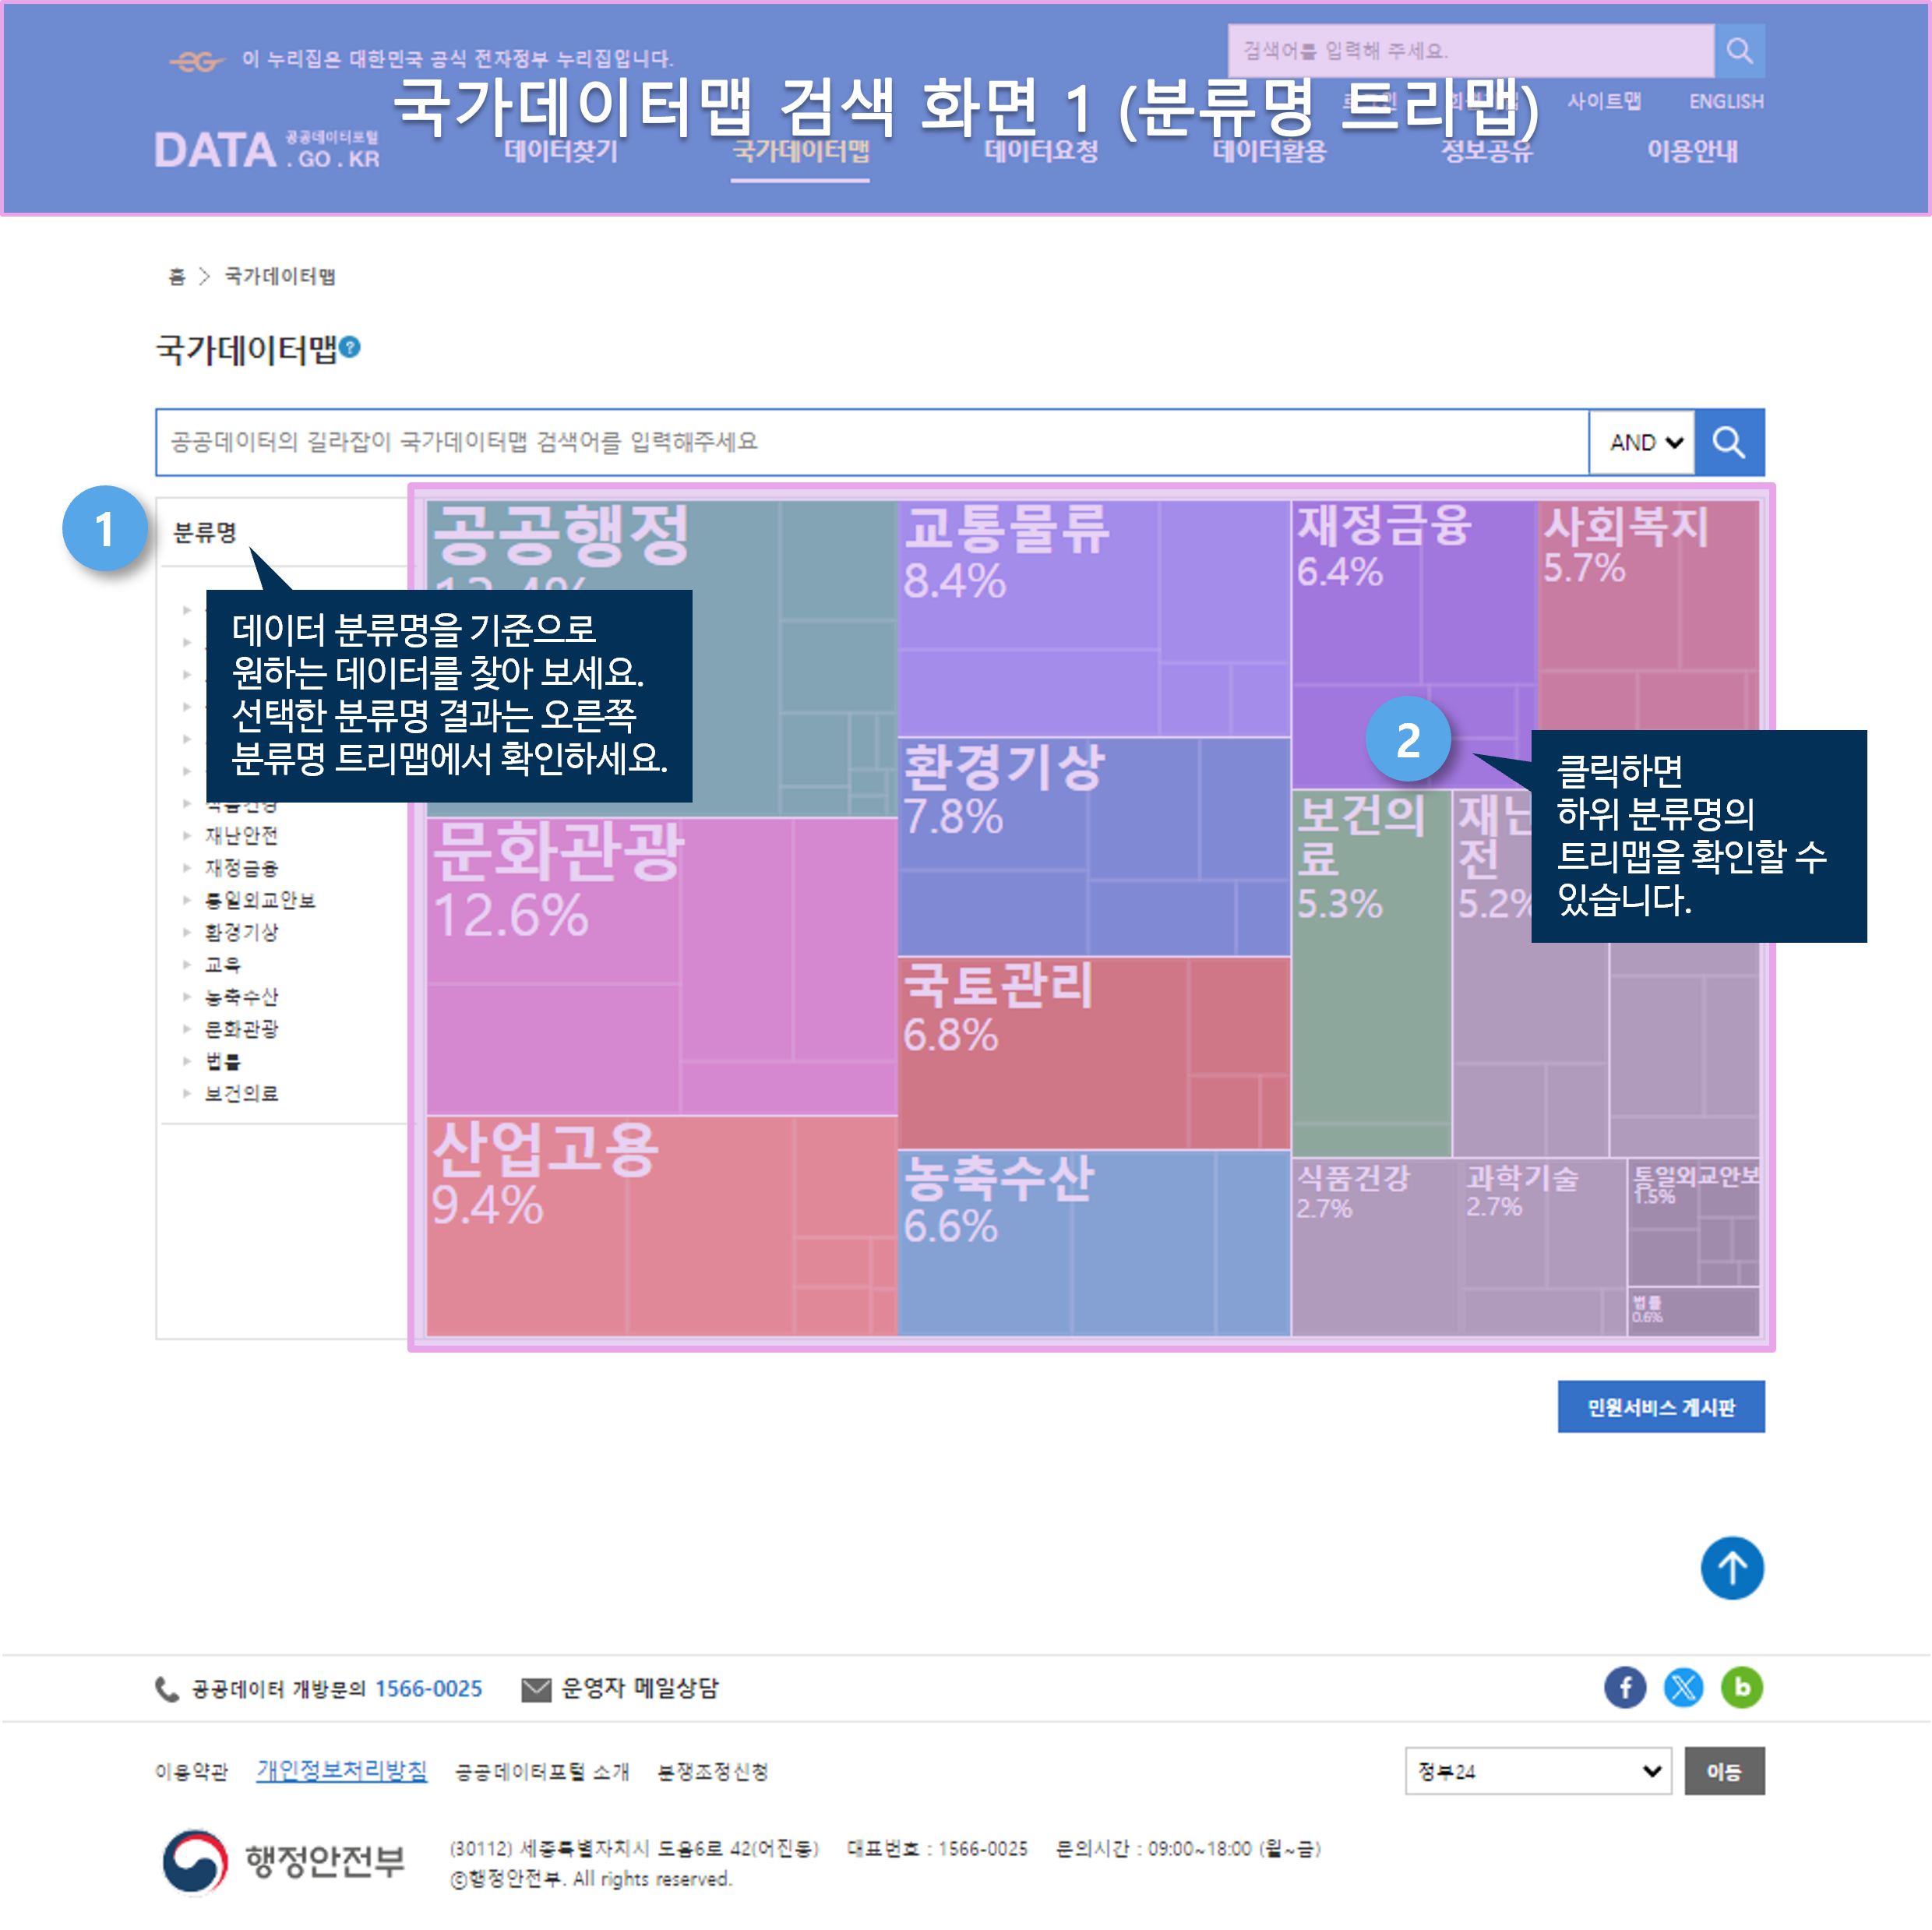 National Data Map Search 1  (Category : Treemap)